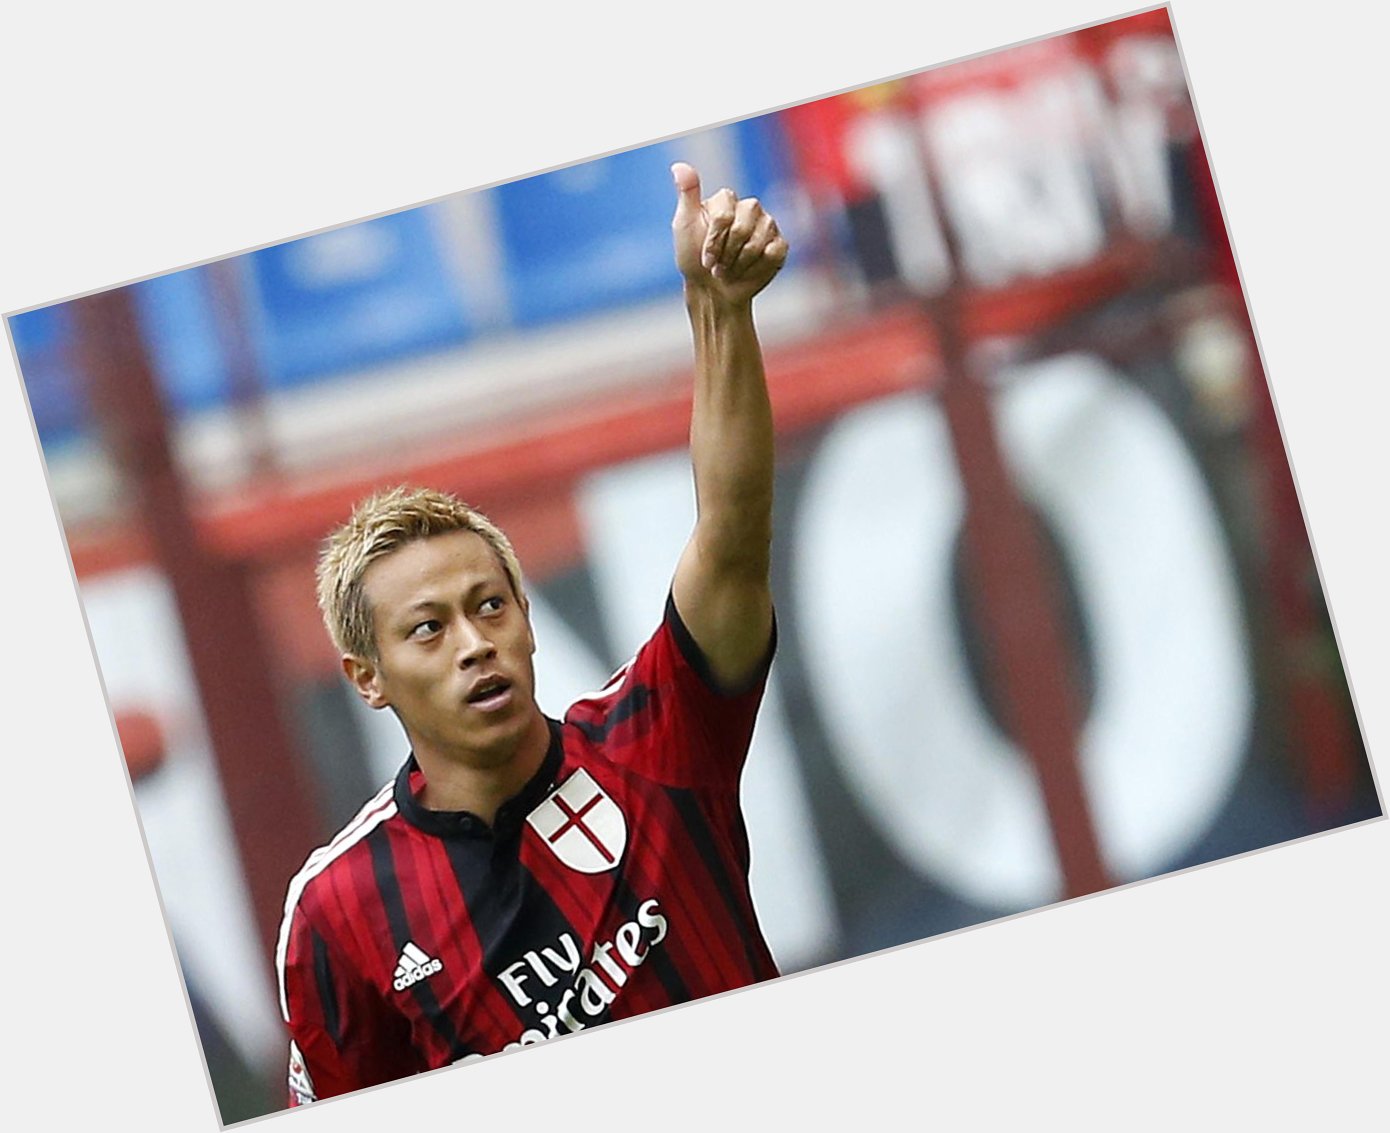 Happy 29th birthday to Keisuke Honda. He\s scored 29 goals in 72 games for Japan. 